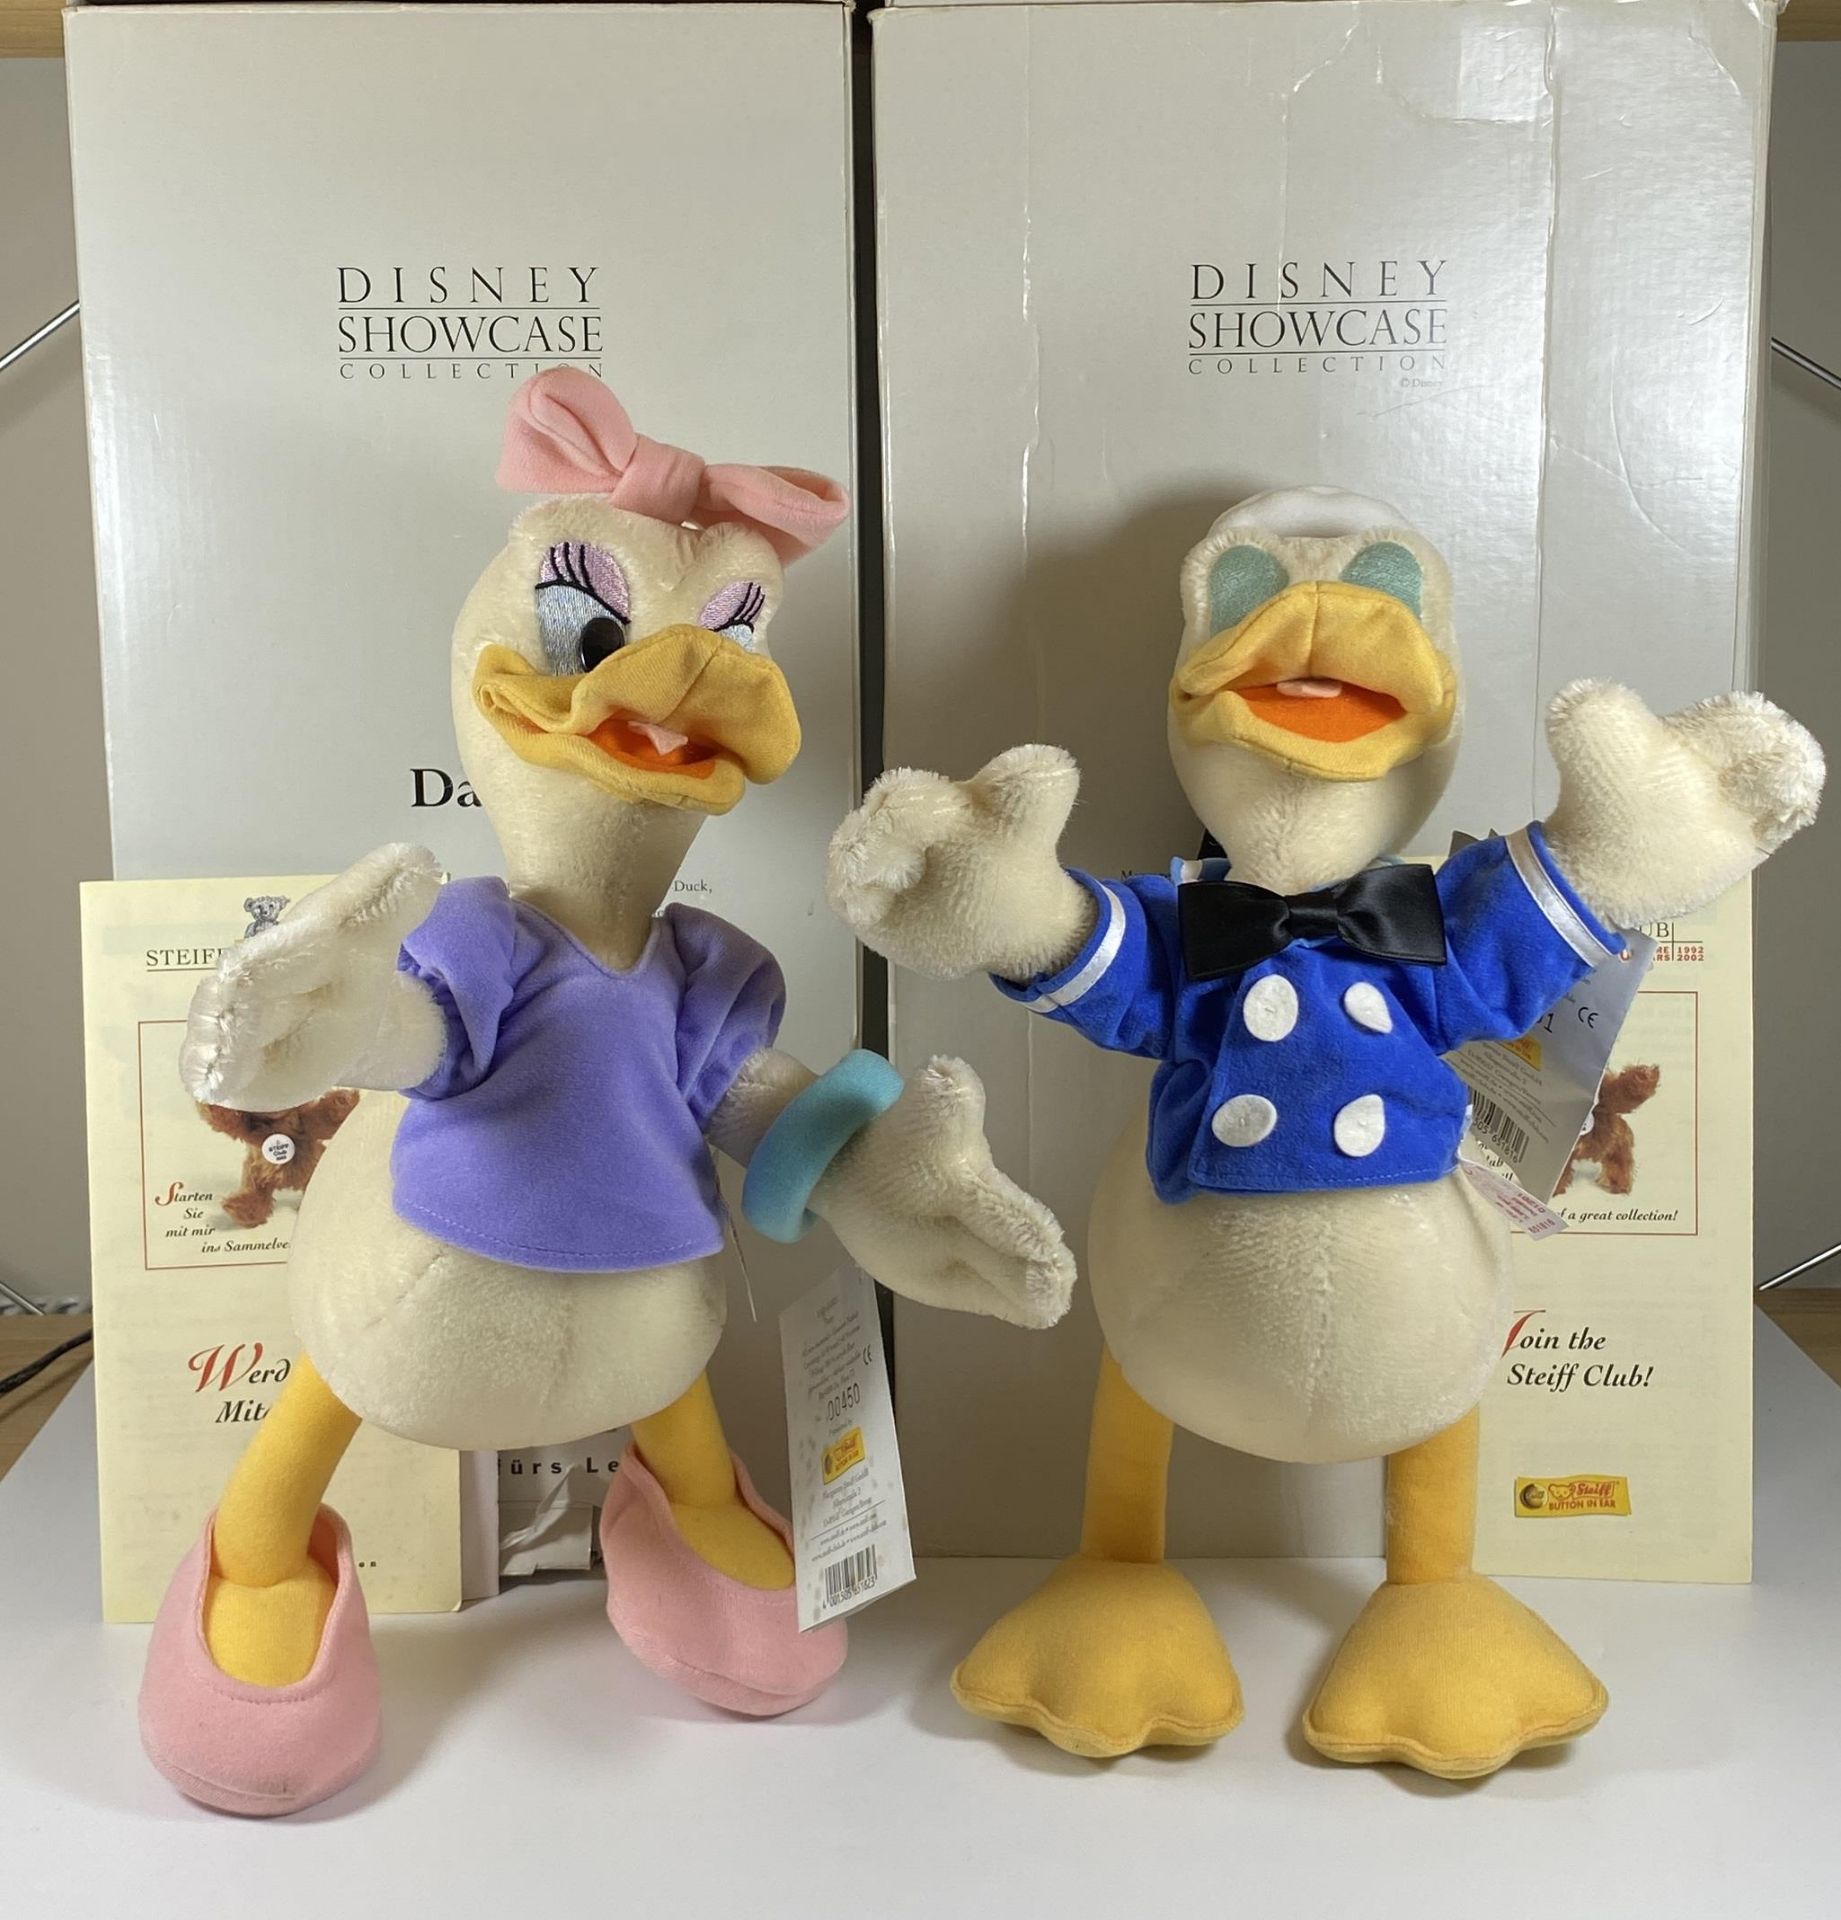 A PAIR OF LIMITED EDITION STEIFF MOHAIR DISNEY SHOWCASE COLLECTION SOFT TOY FIGURES, BOTH BOXED - Image 2 of 8